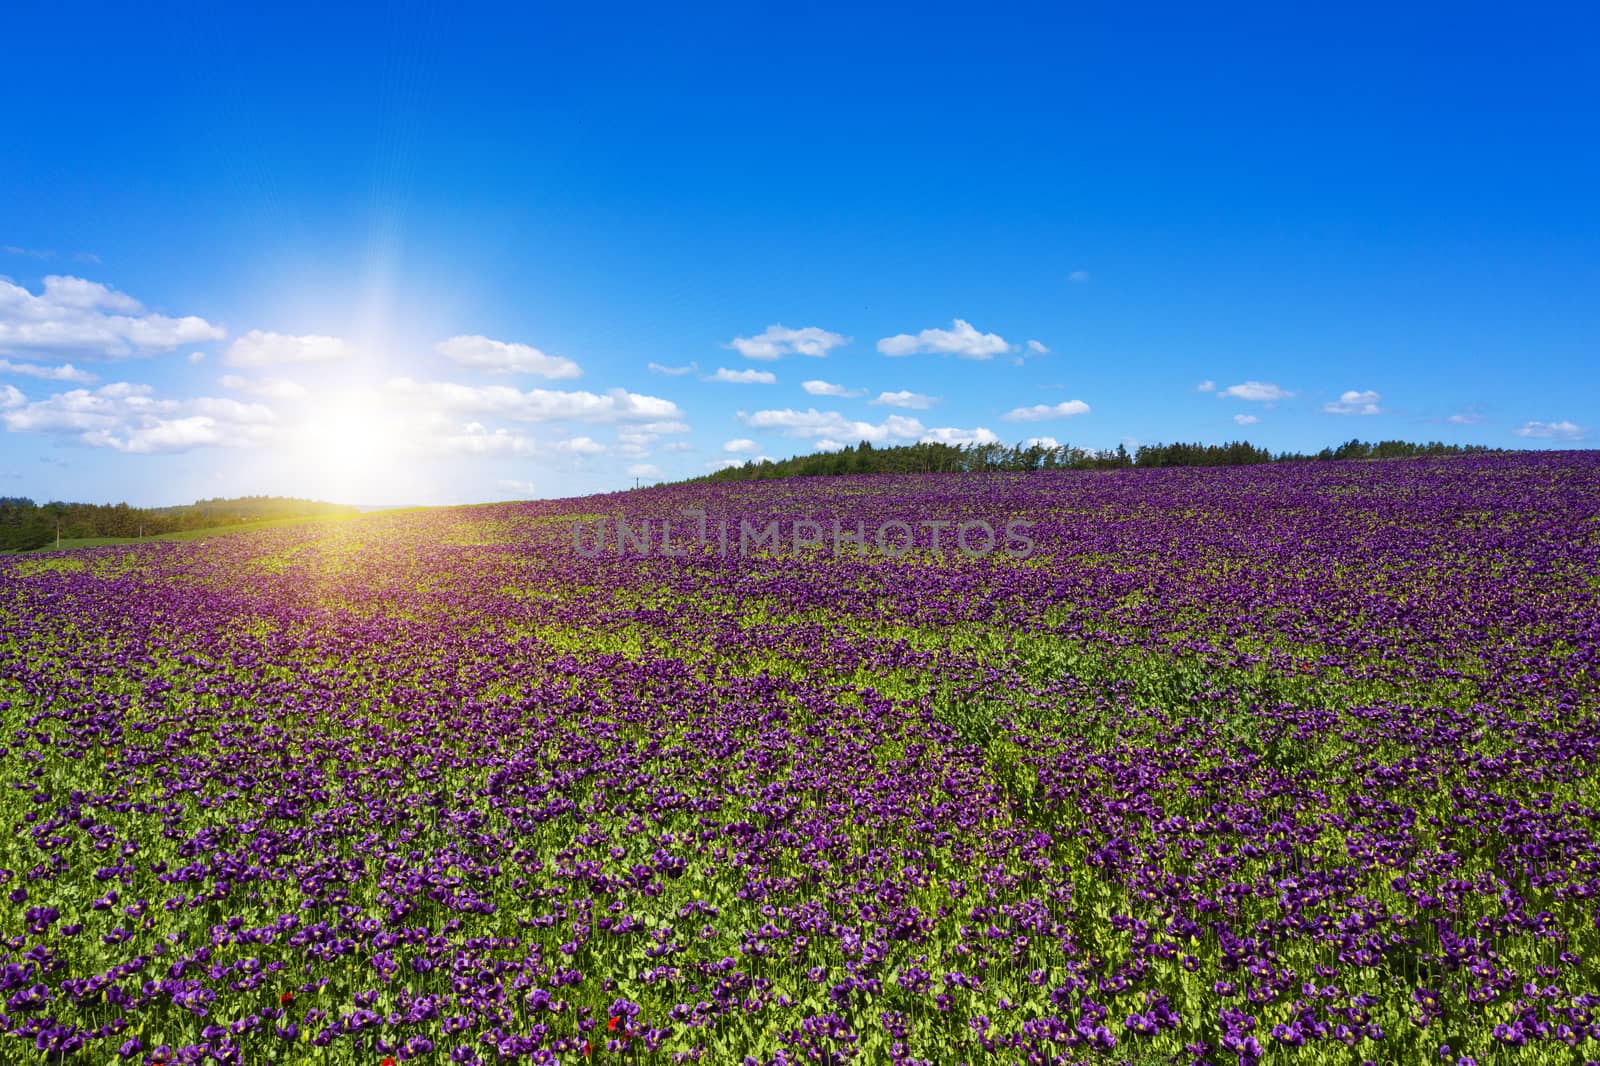 Blooming flowers of purple poppy (Papaver somniferum) field on a hill with a sun shining on it